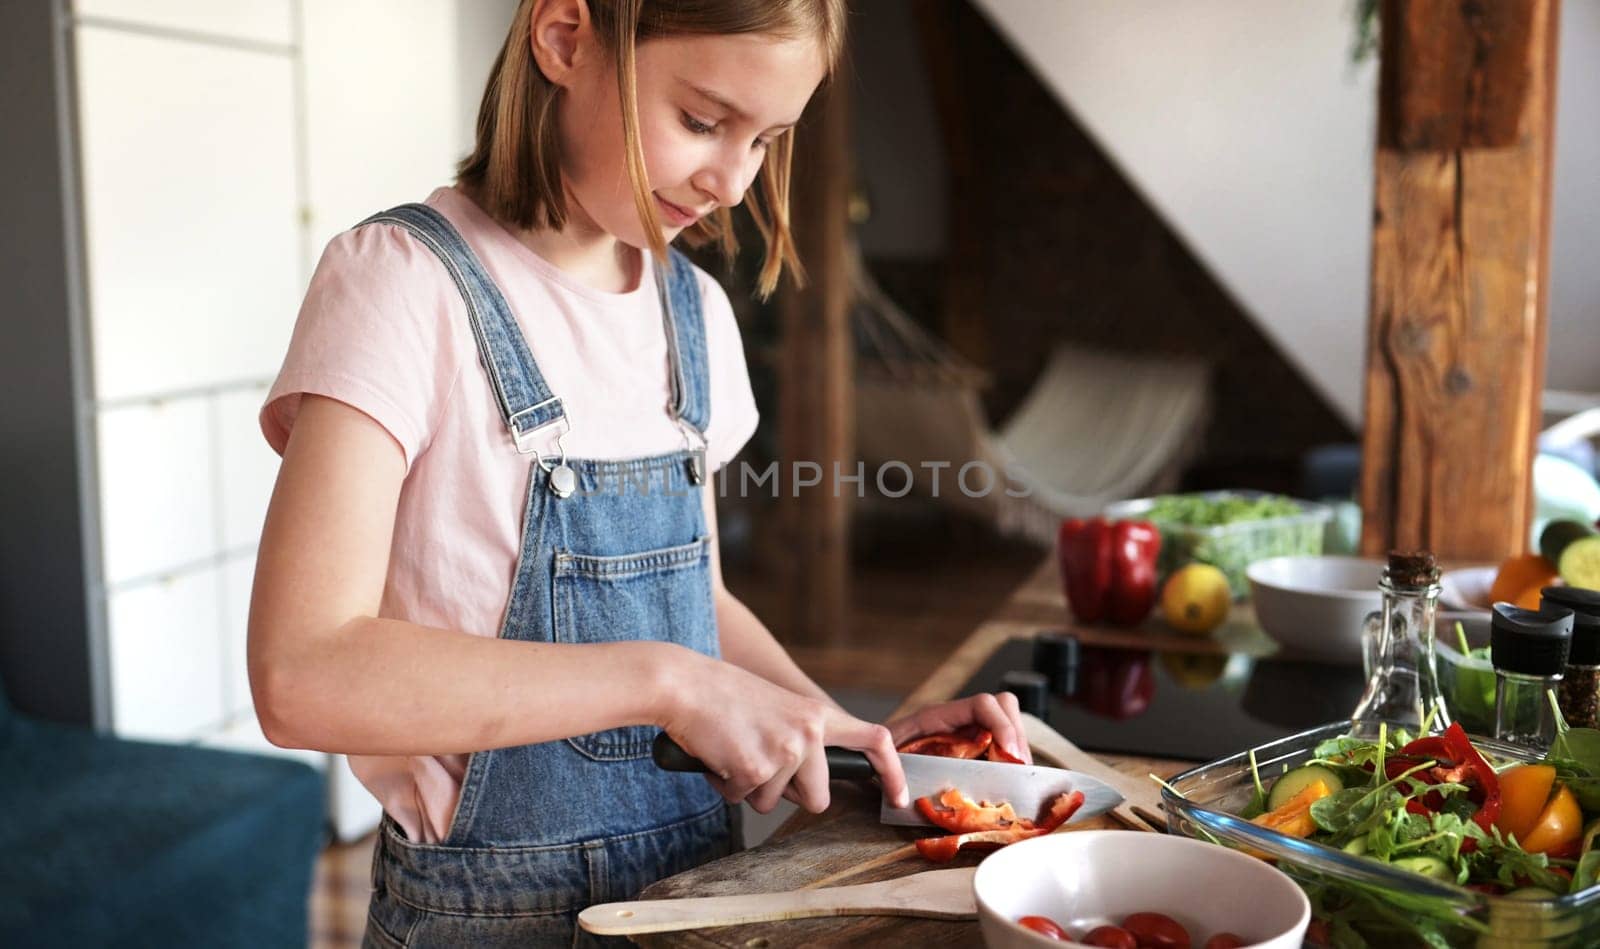 Cute Little Girl Cooking A Vegetable Salad In The Kitchen by GekaSkr